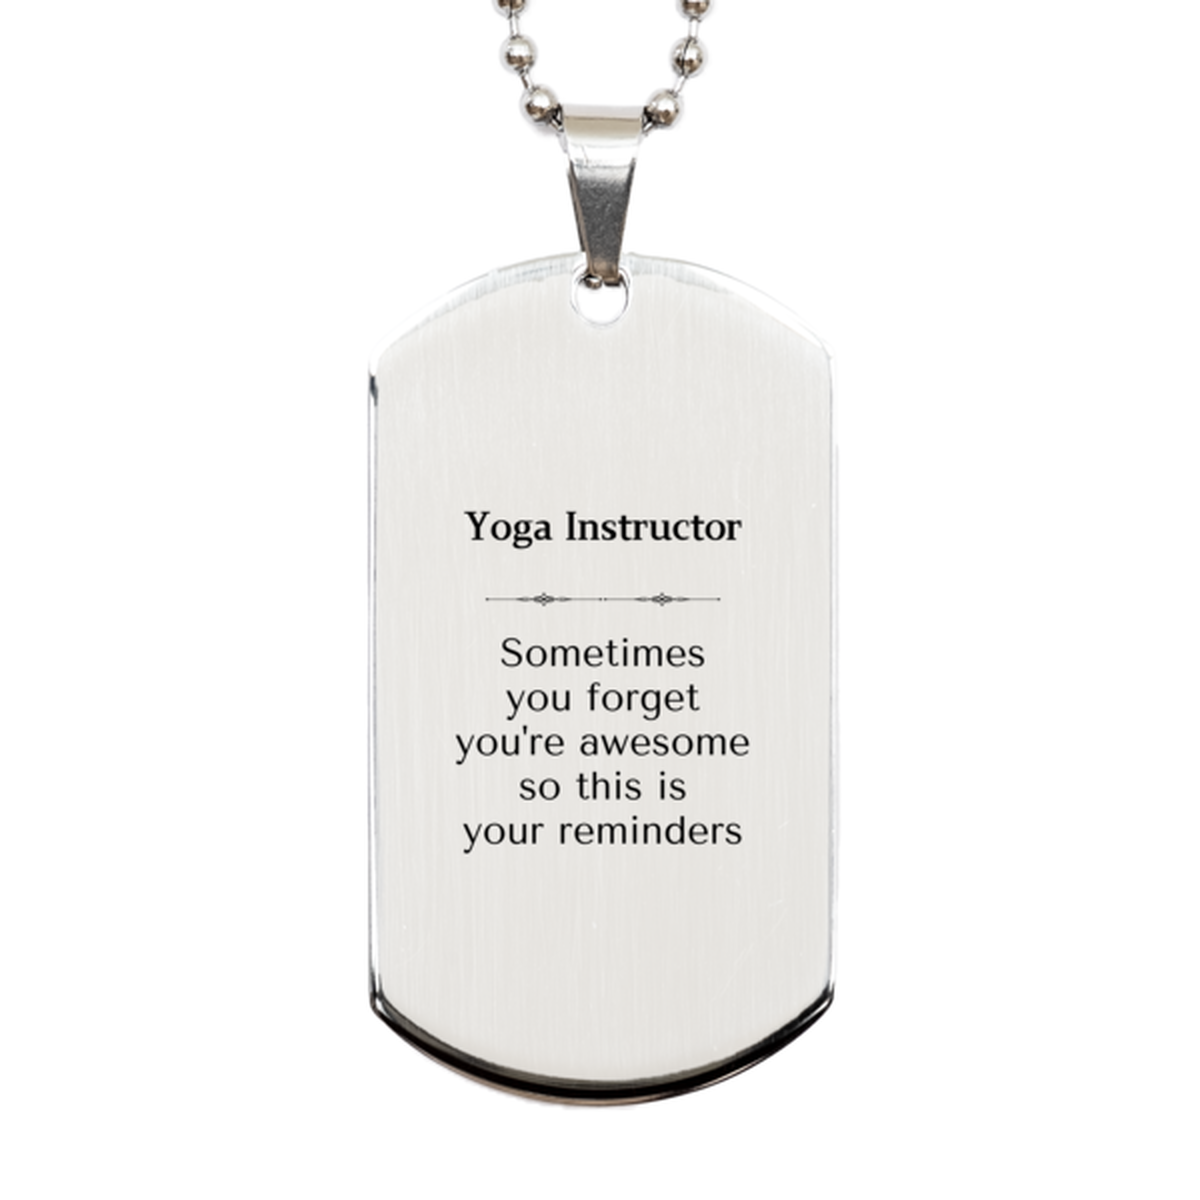 Sentimental Yoga Instructor Silver Dog Tag, Yoga Instructor Sometimes you forget you're awesome so this is your reminders, Graduation Christmas Birthday Gifts for Yoga Instructor, Men, Women, Coworkers